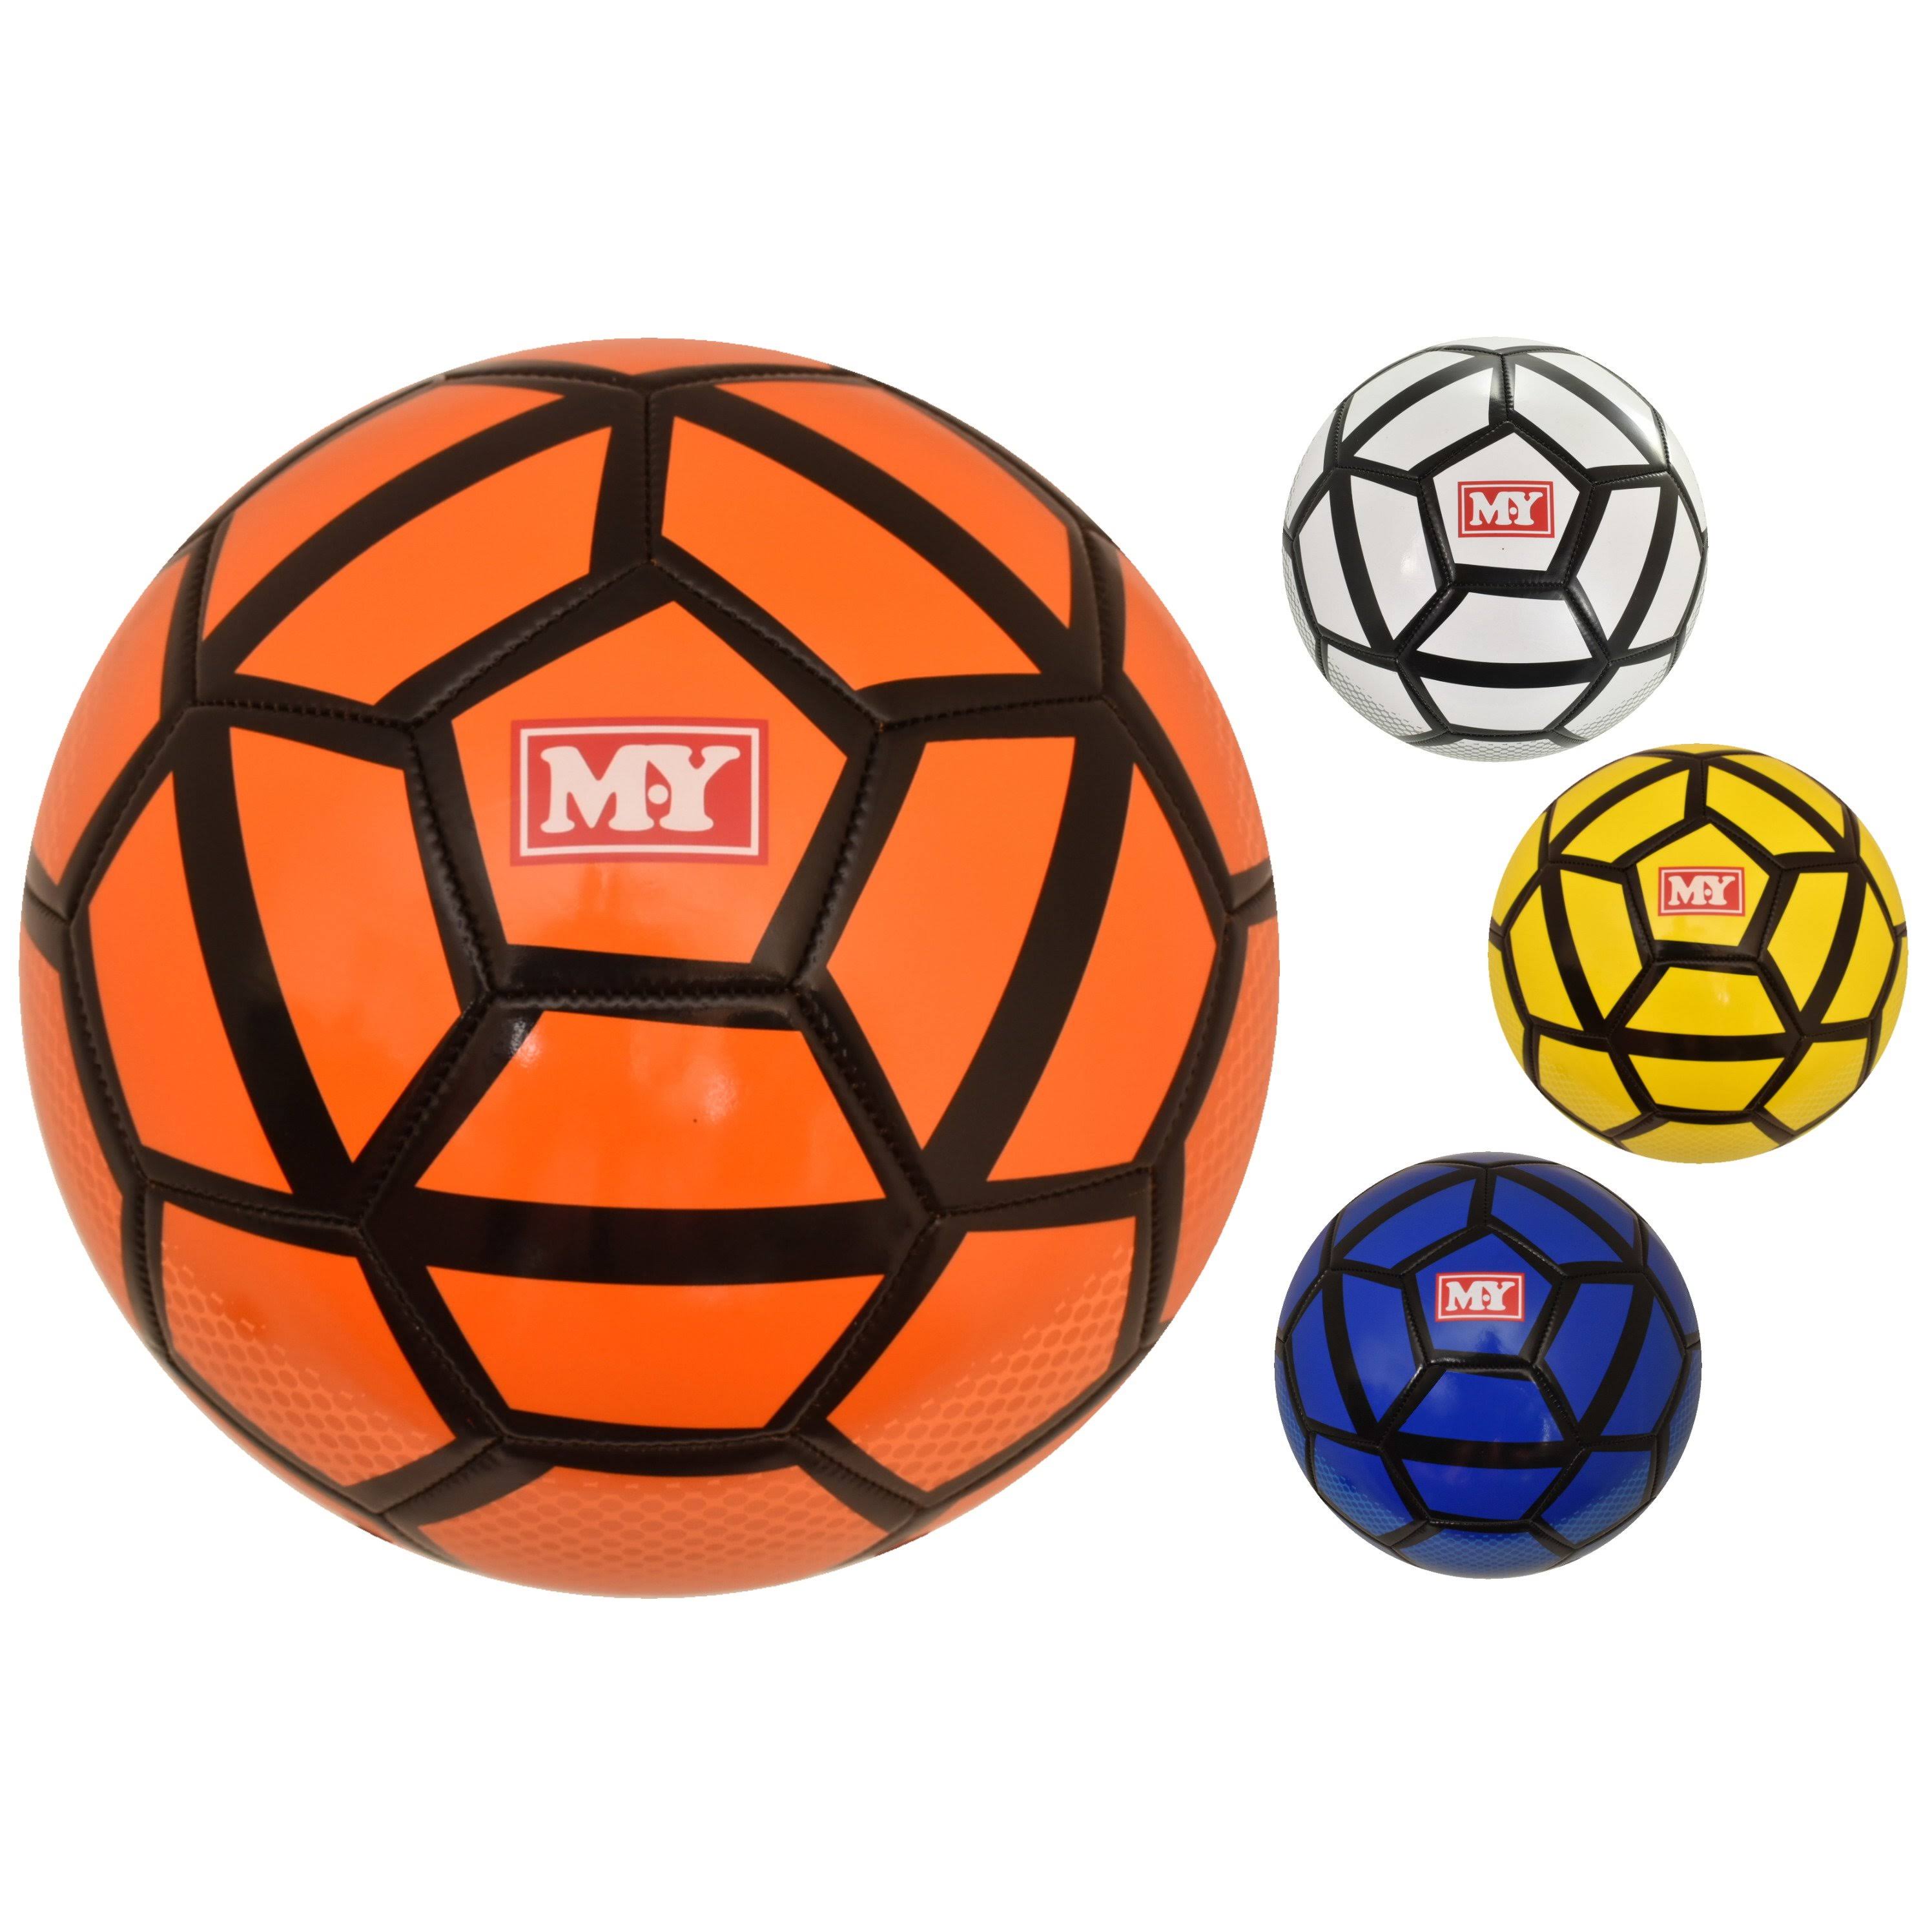 32 Panel 280g Stitched Neon Premier Football